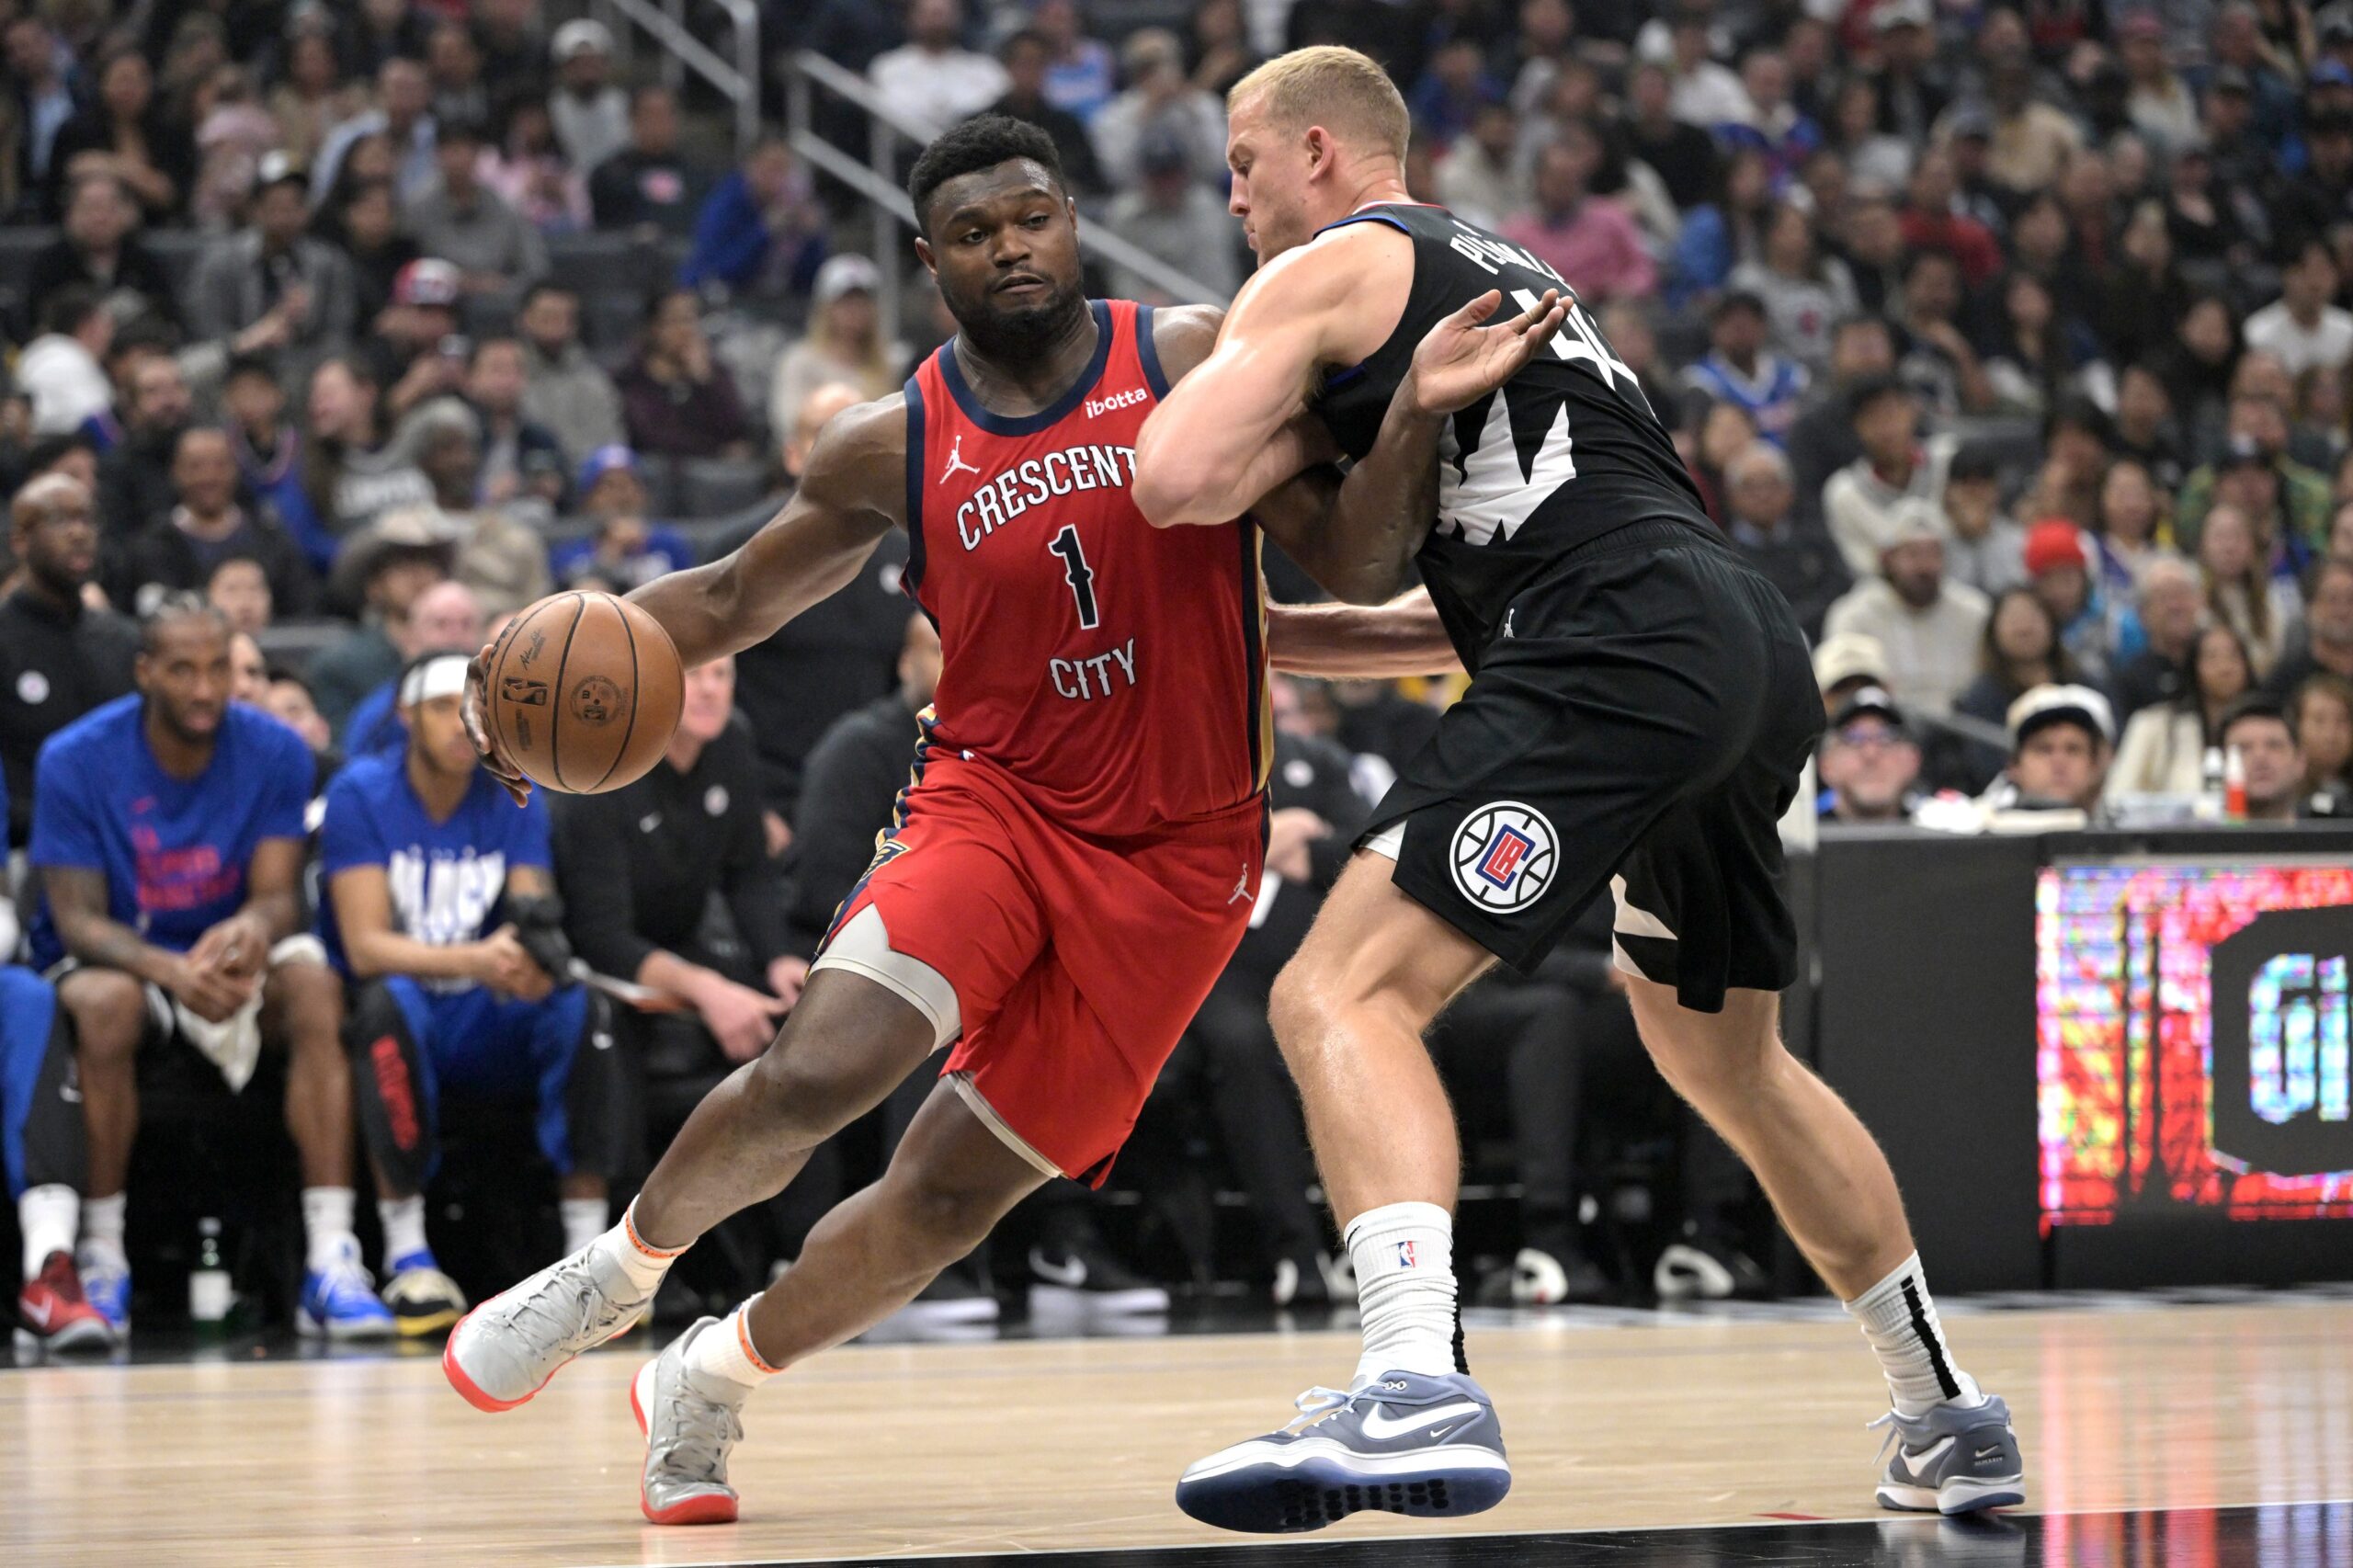 New Orleans Pelicans forward Zion Williamson (1) is defended by Los Angeles Clippers center Mason Plumlee (44) in the first half at Crypto.com Arena.